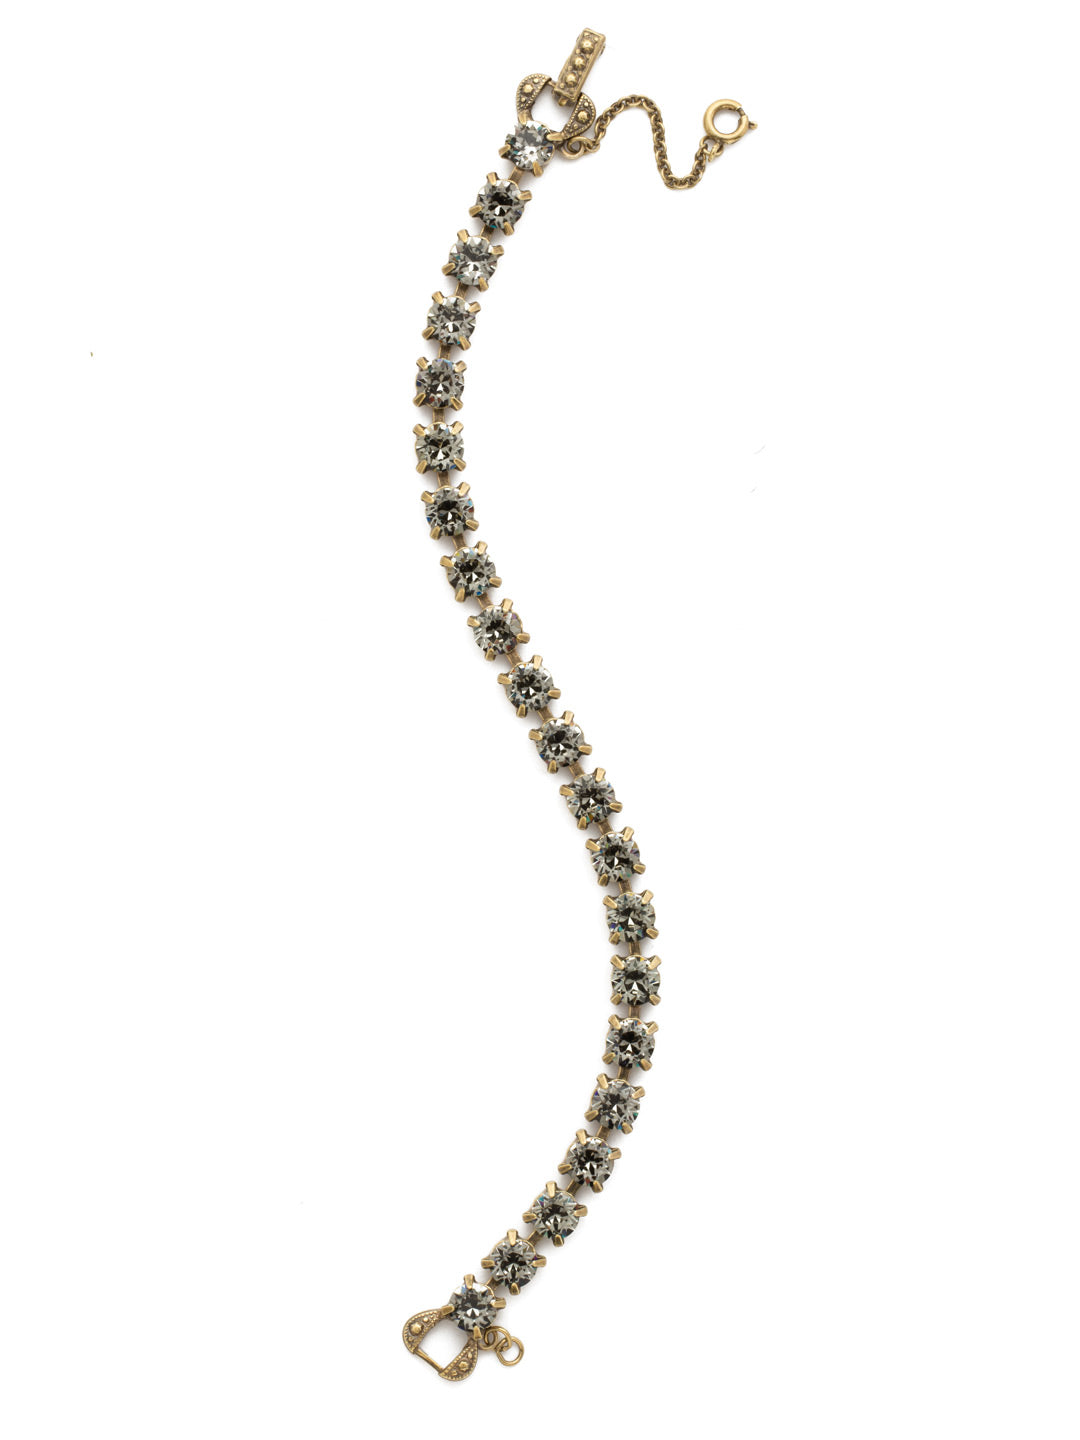 Repeating Round Tennis Bracelet - BCZ36AGBD